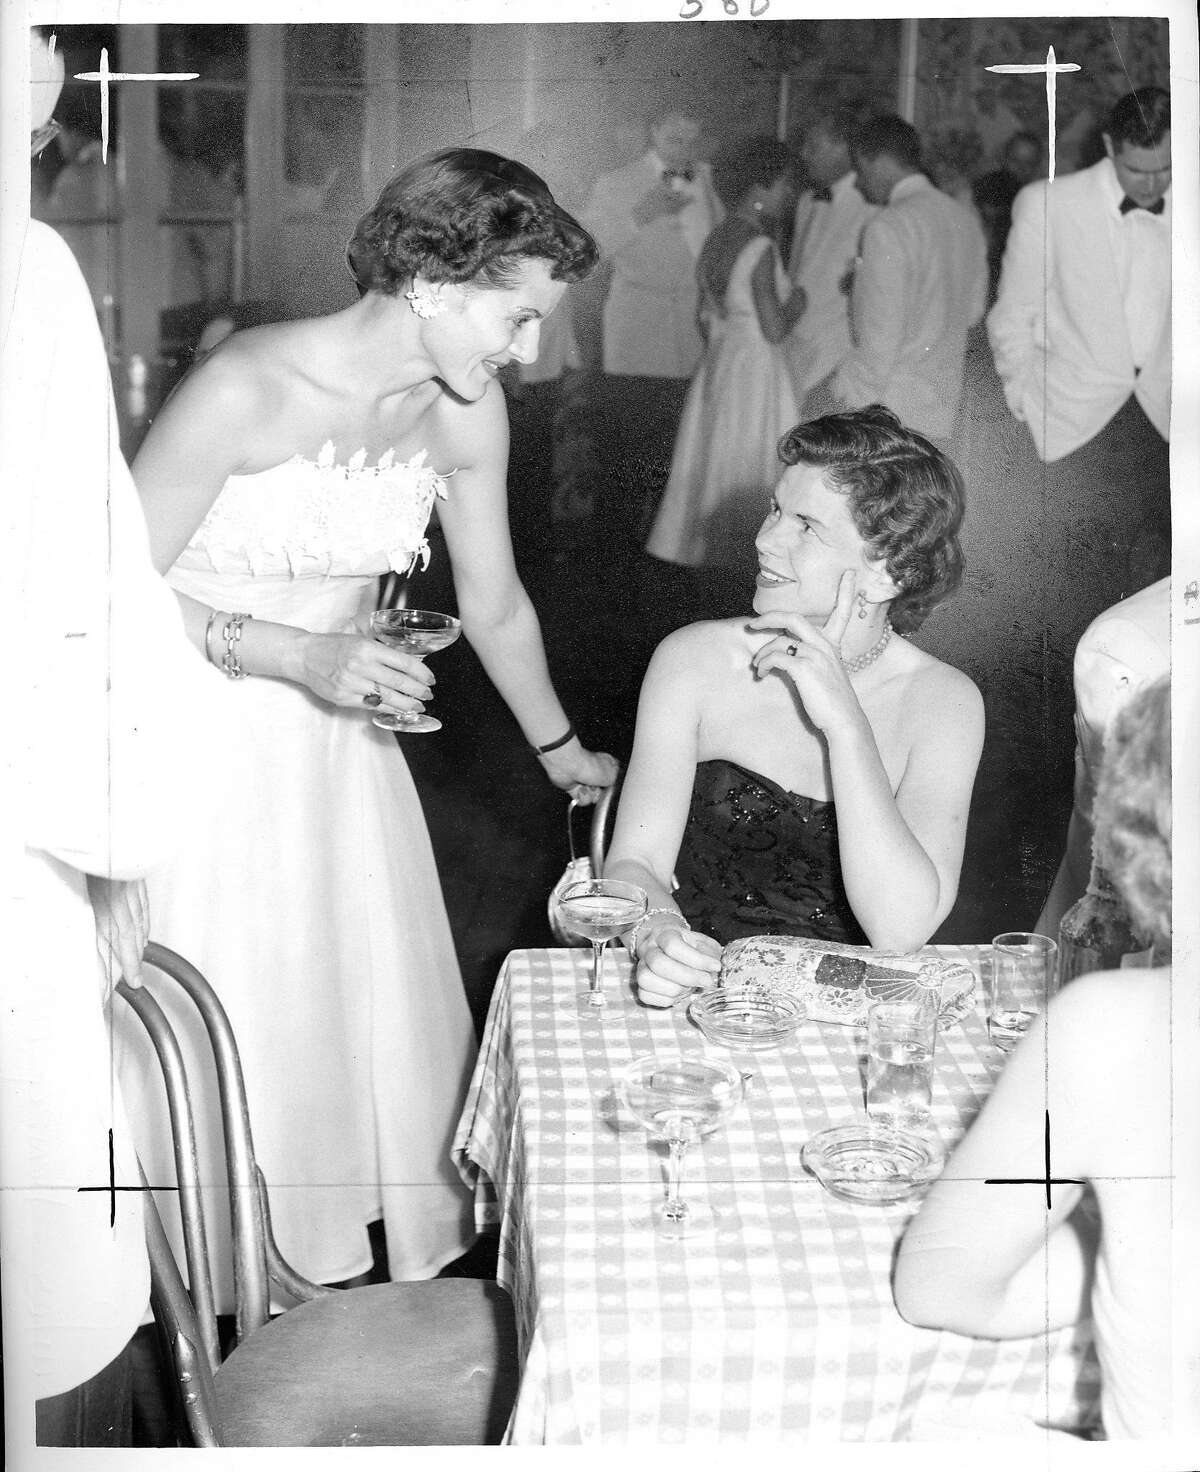  Constance Crowley Bowles, seated, with Beverly Nickel in 1954.